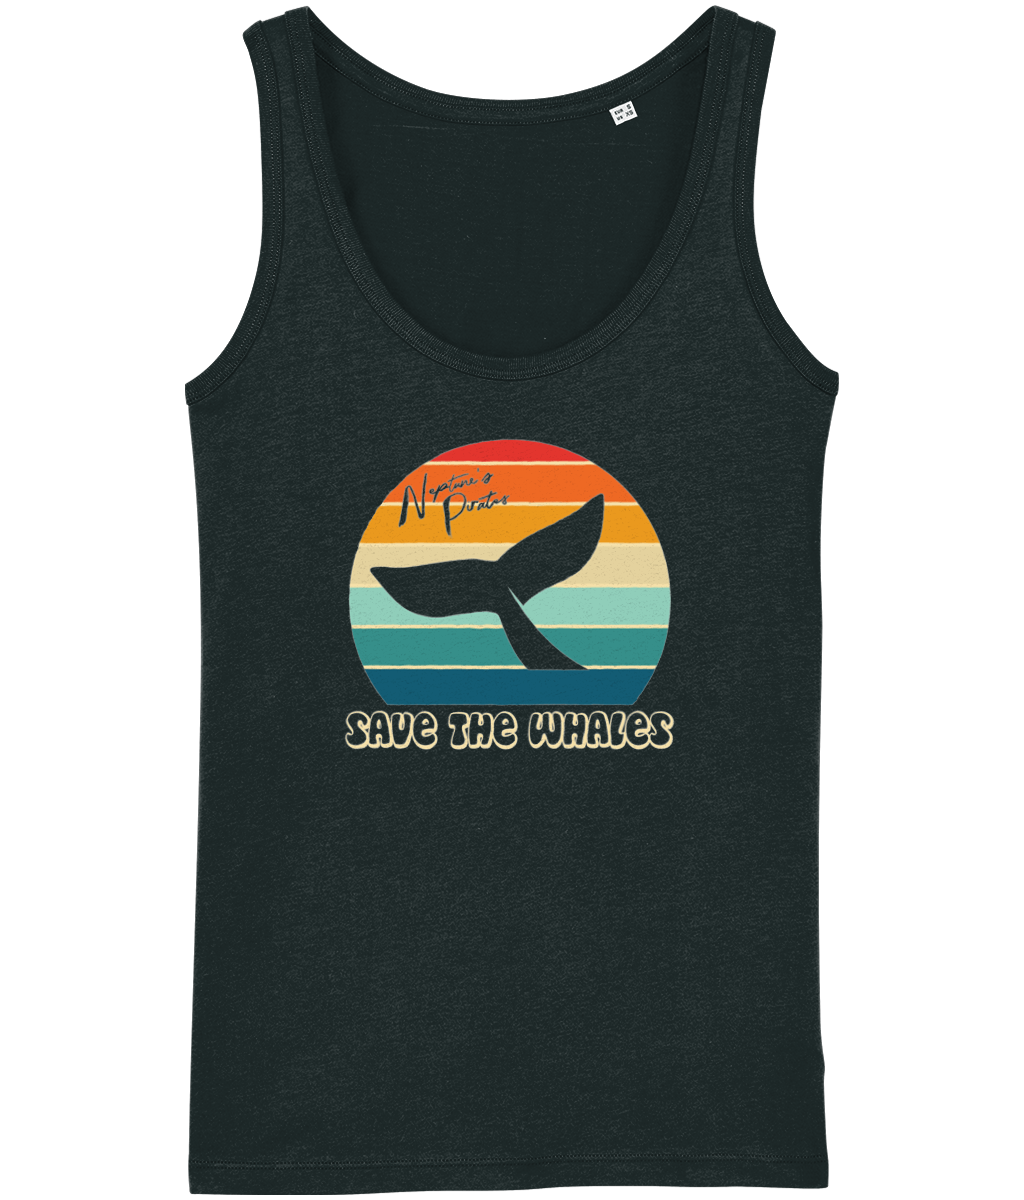 Retro 'Save The Whales' Women's Tank Top - Captain Paul Watson Foundation (t/a Neptune's Pirates)